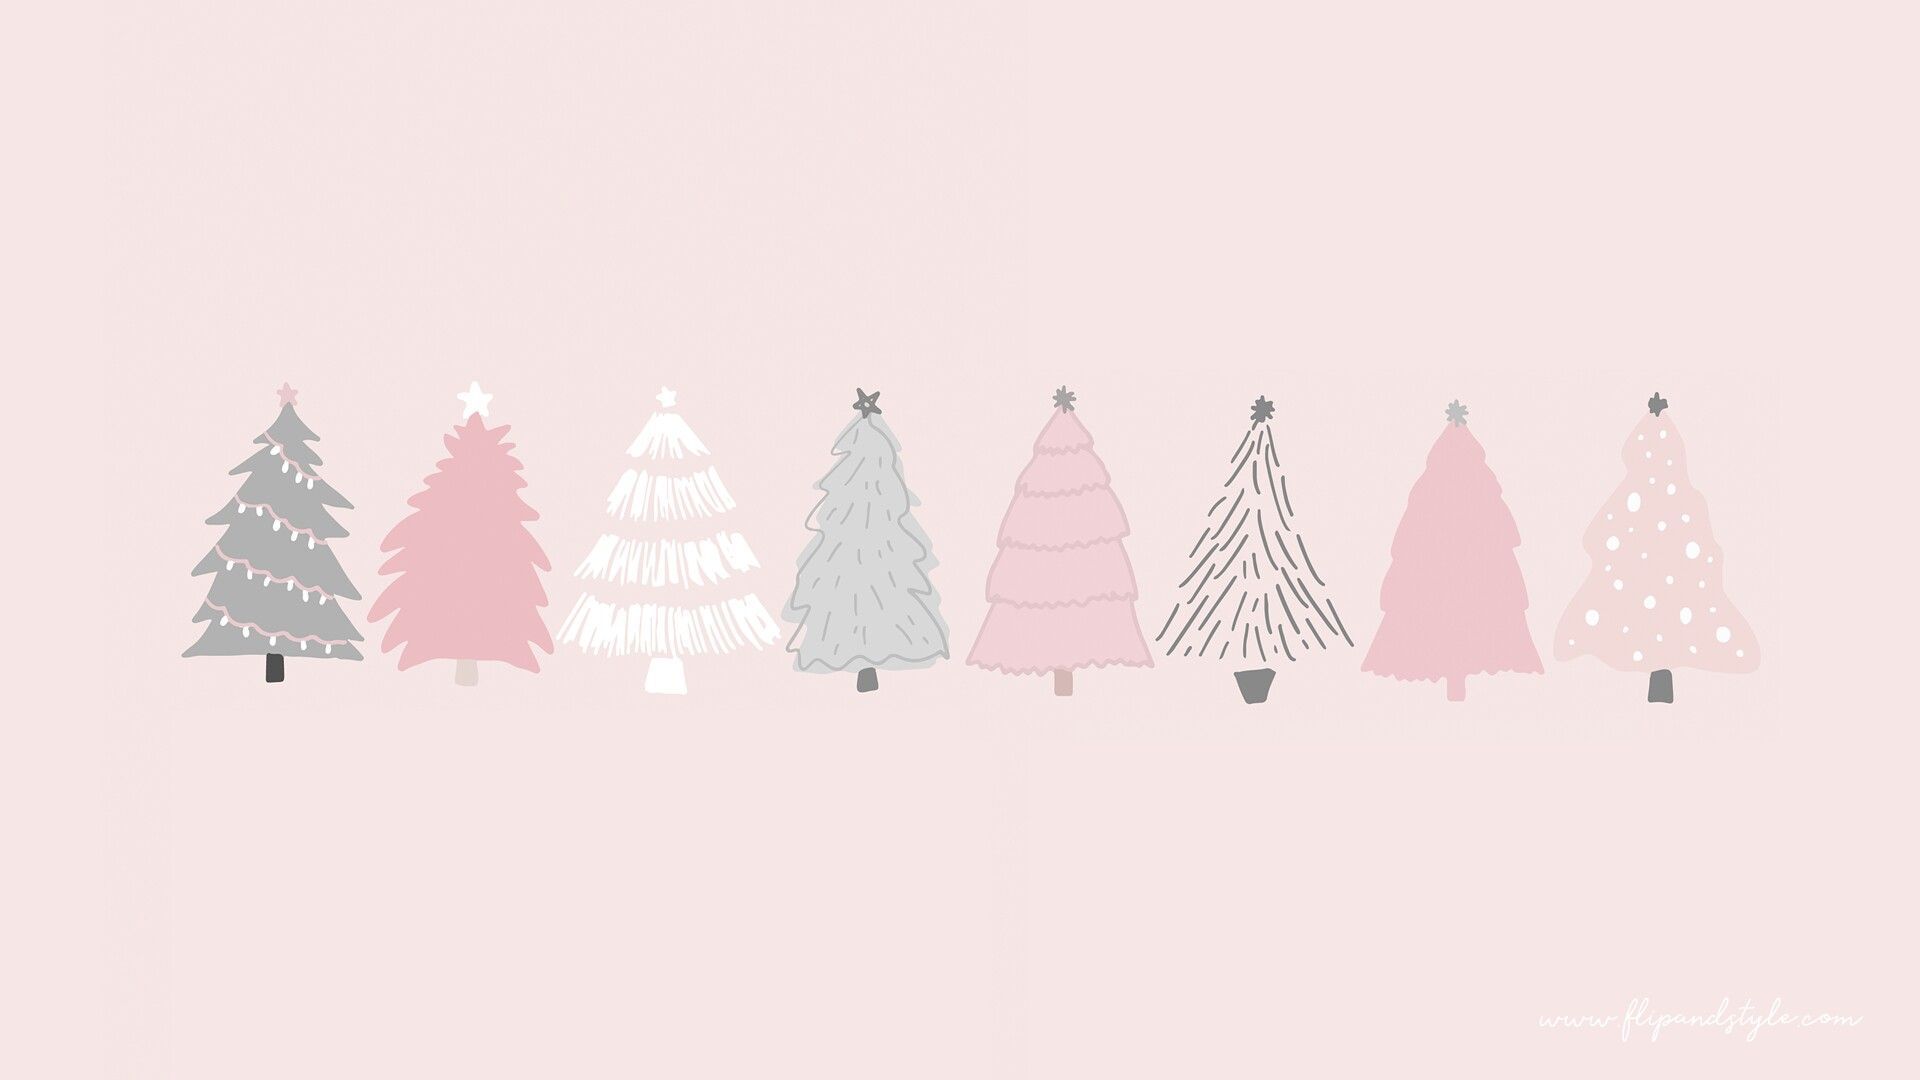 Related image. Free wallpaper background, Tree desktop wallpaper, Christmas desktop wallpaper